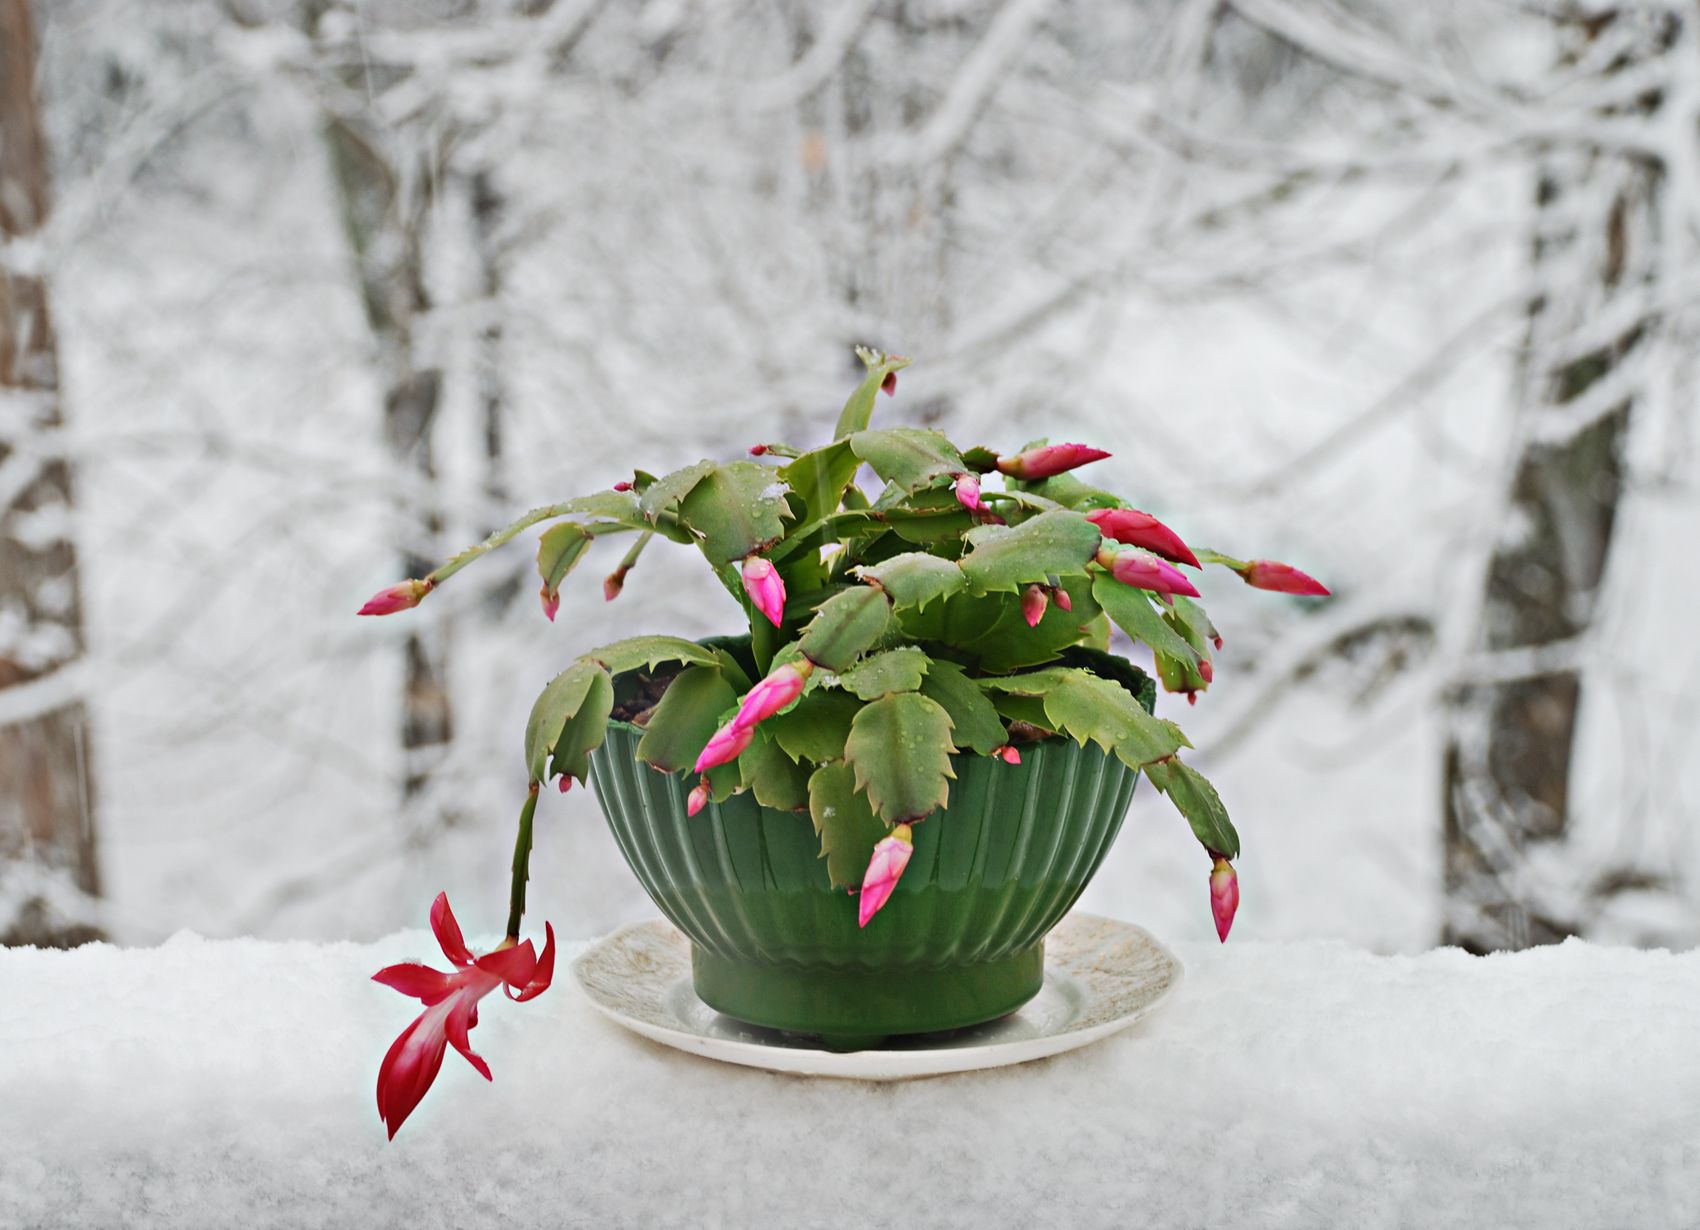 30 Christmas Plants To Decorate Your Winter Season